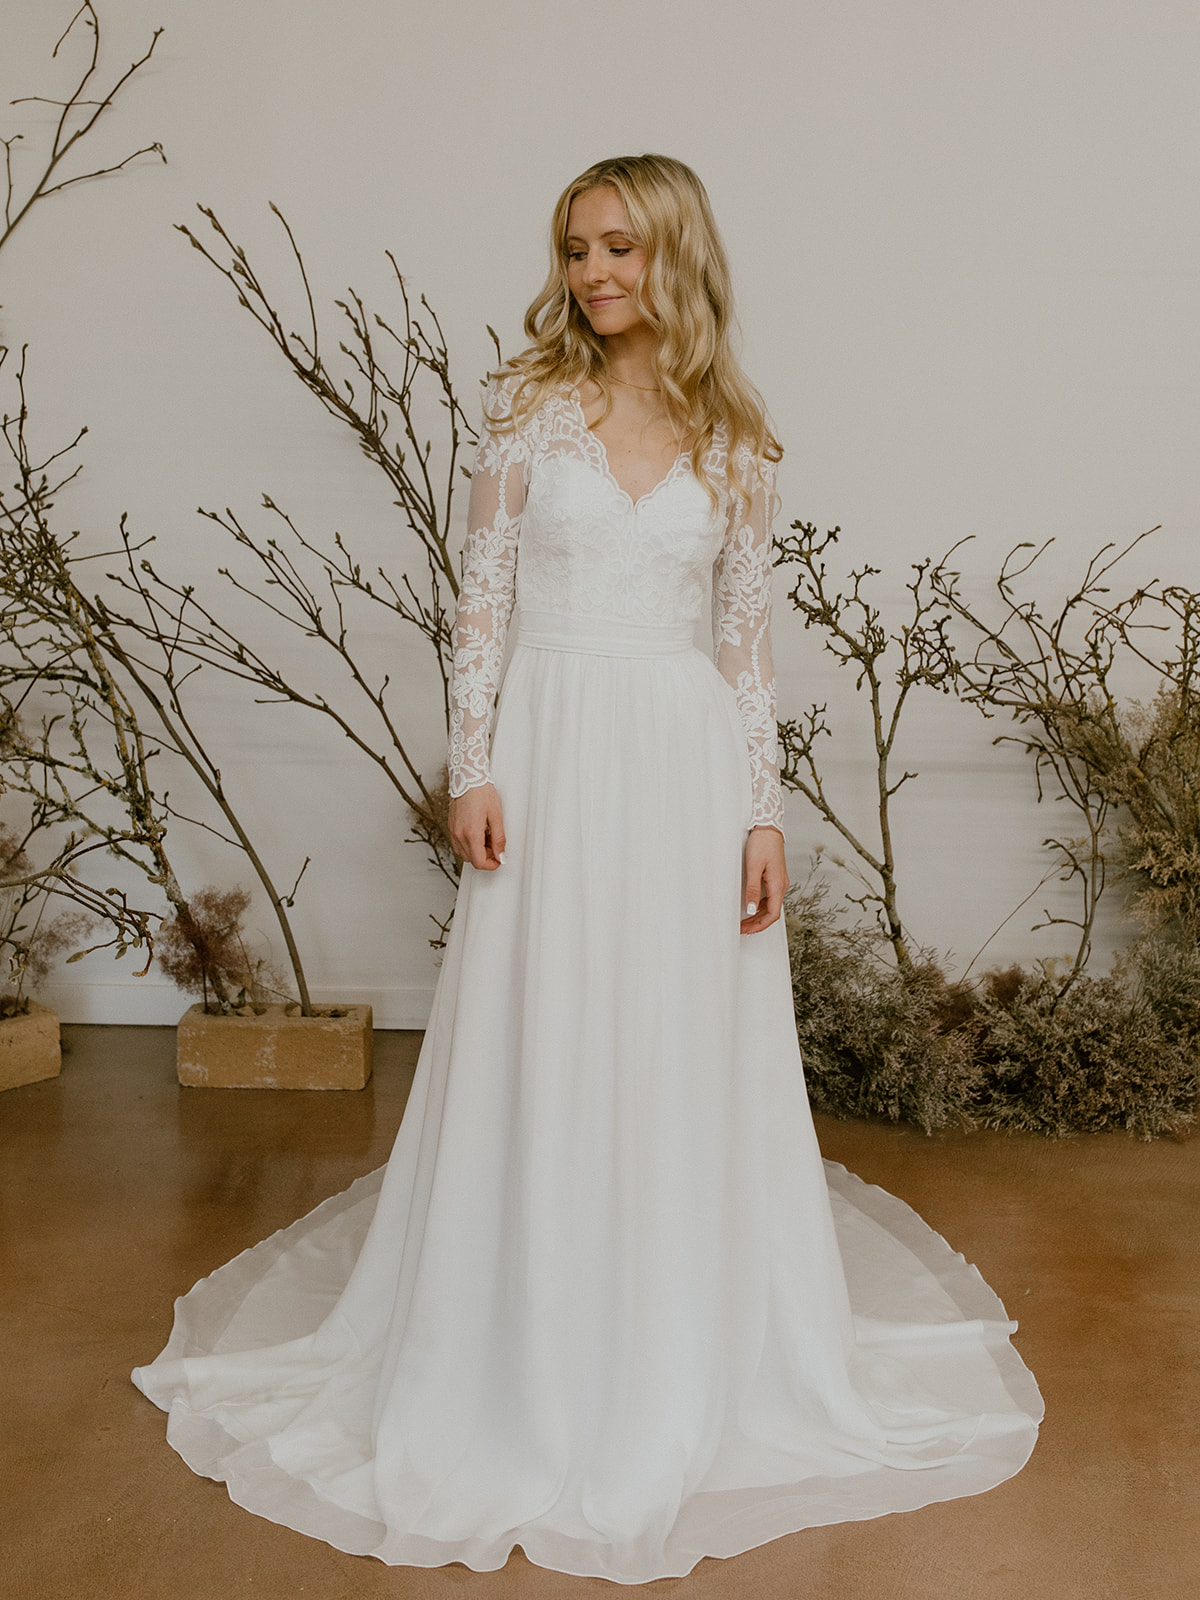 Sephora Lace + Silk Wedding Dress | Dreamers and Lovers